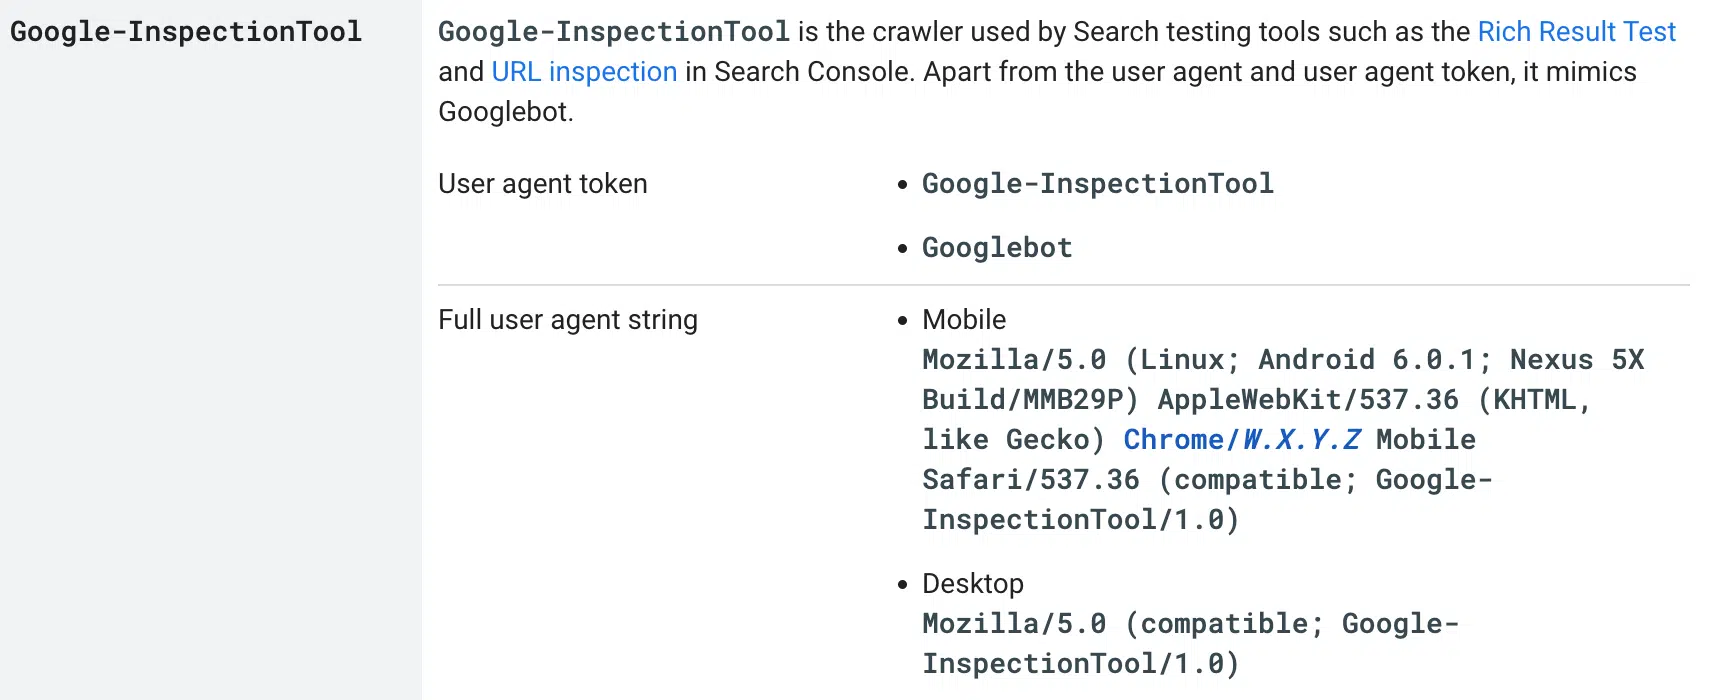 Google Adds Google Inspectiontool To Crawlers 1684322082